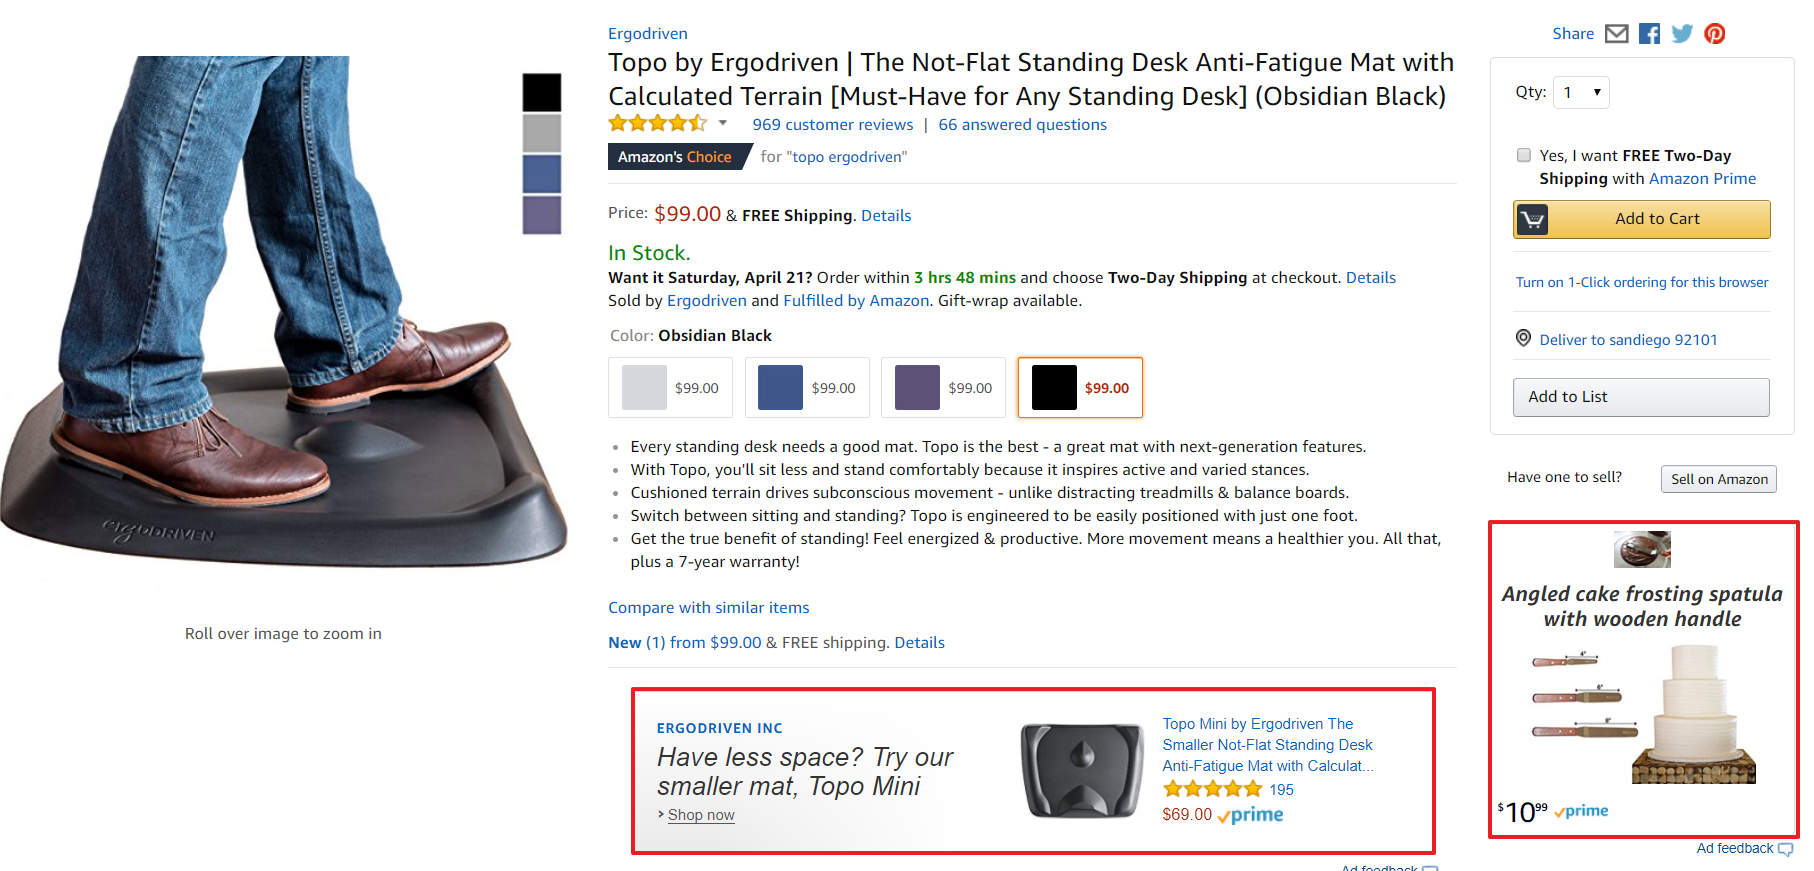 Screenshot showing a product page on amazon.com